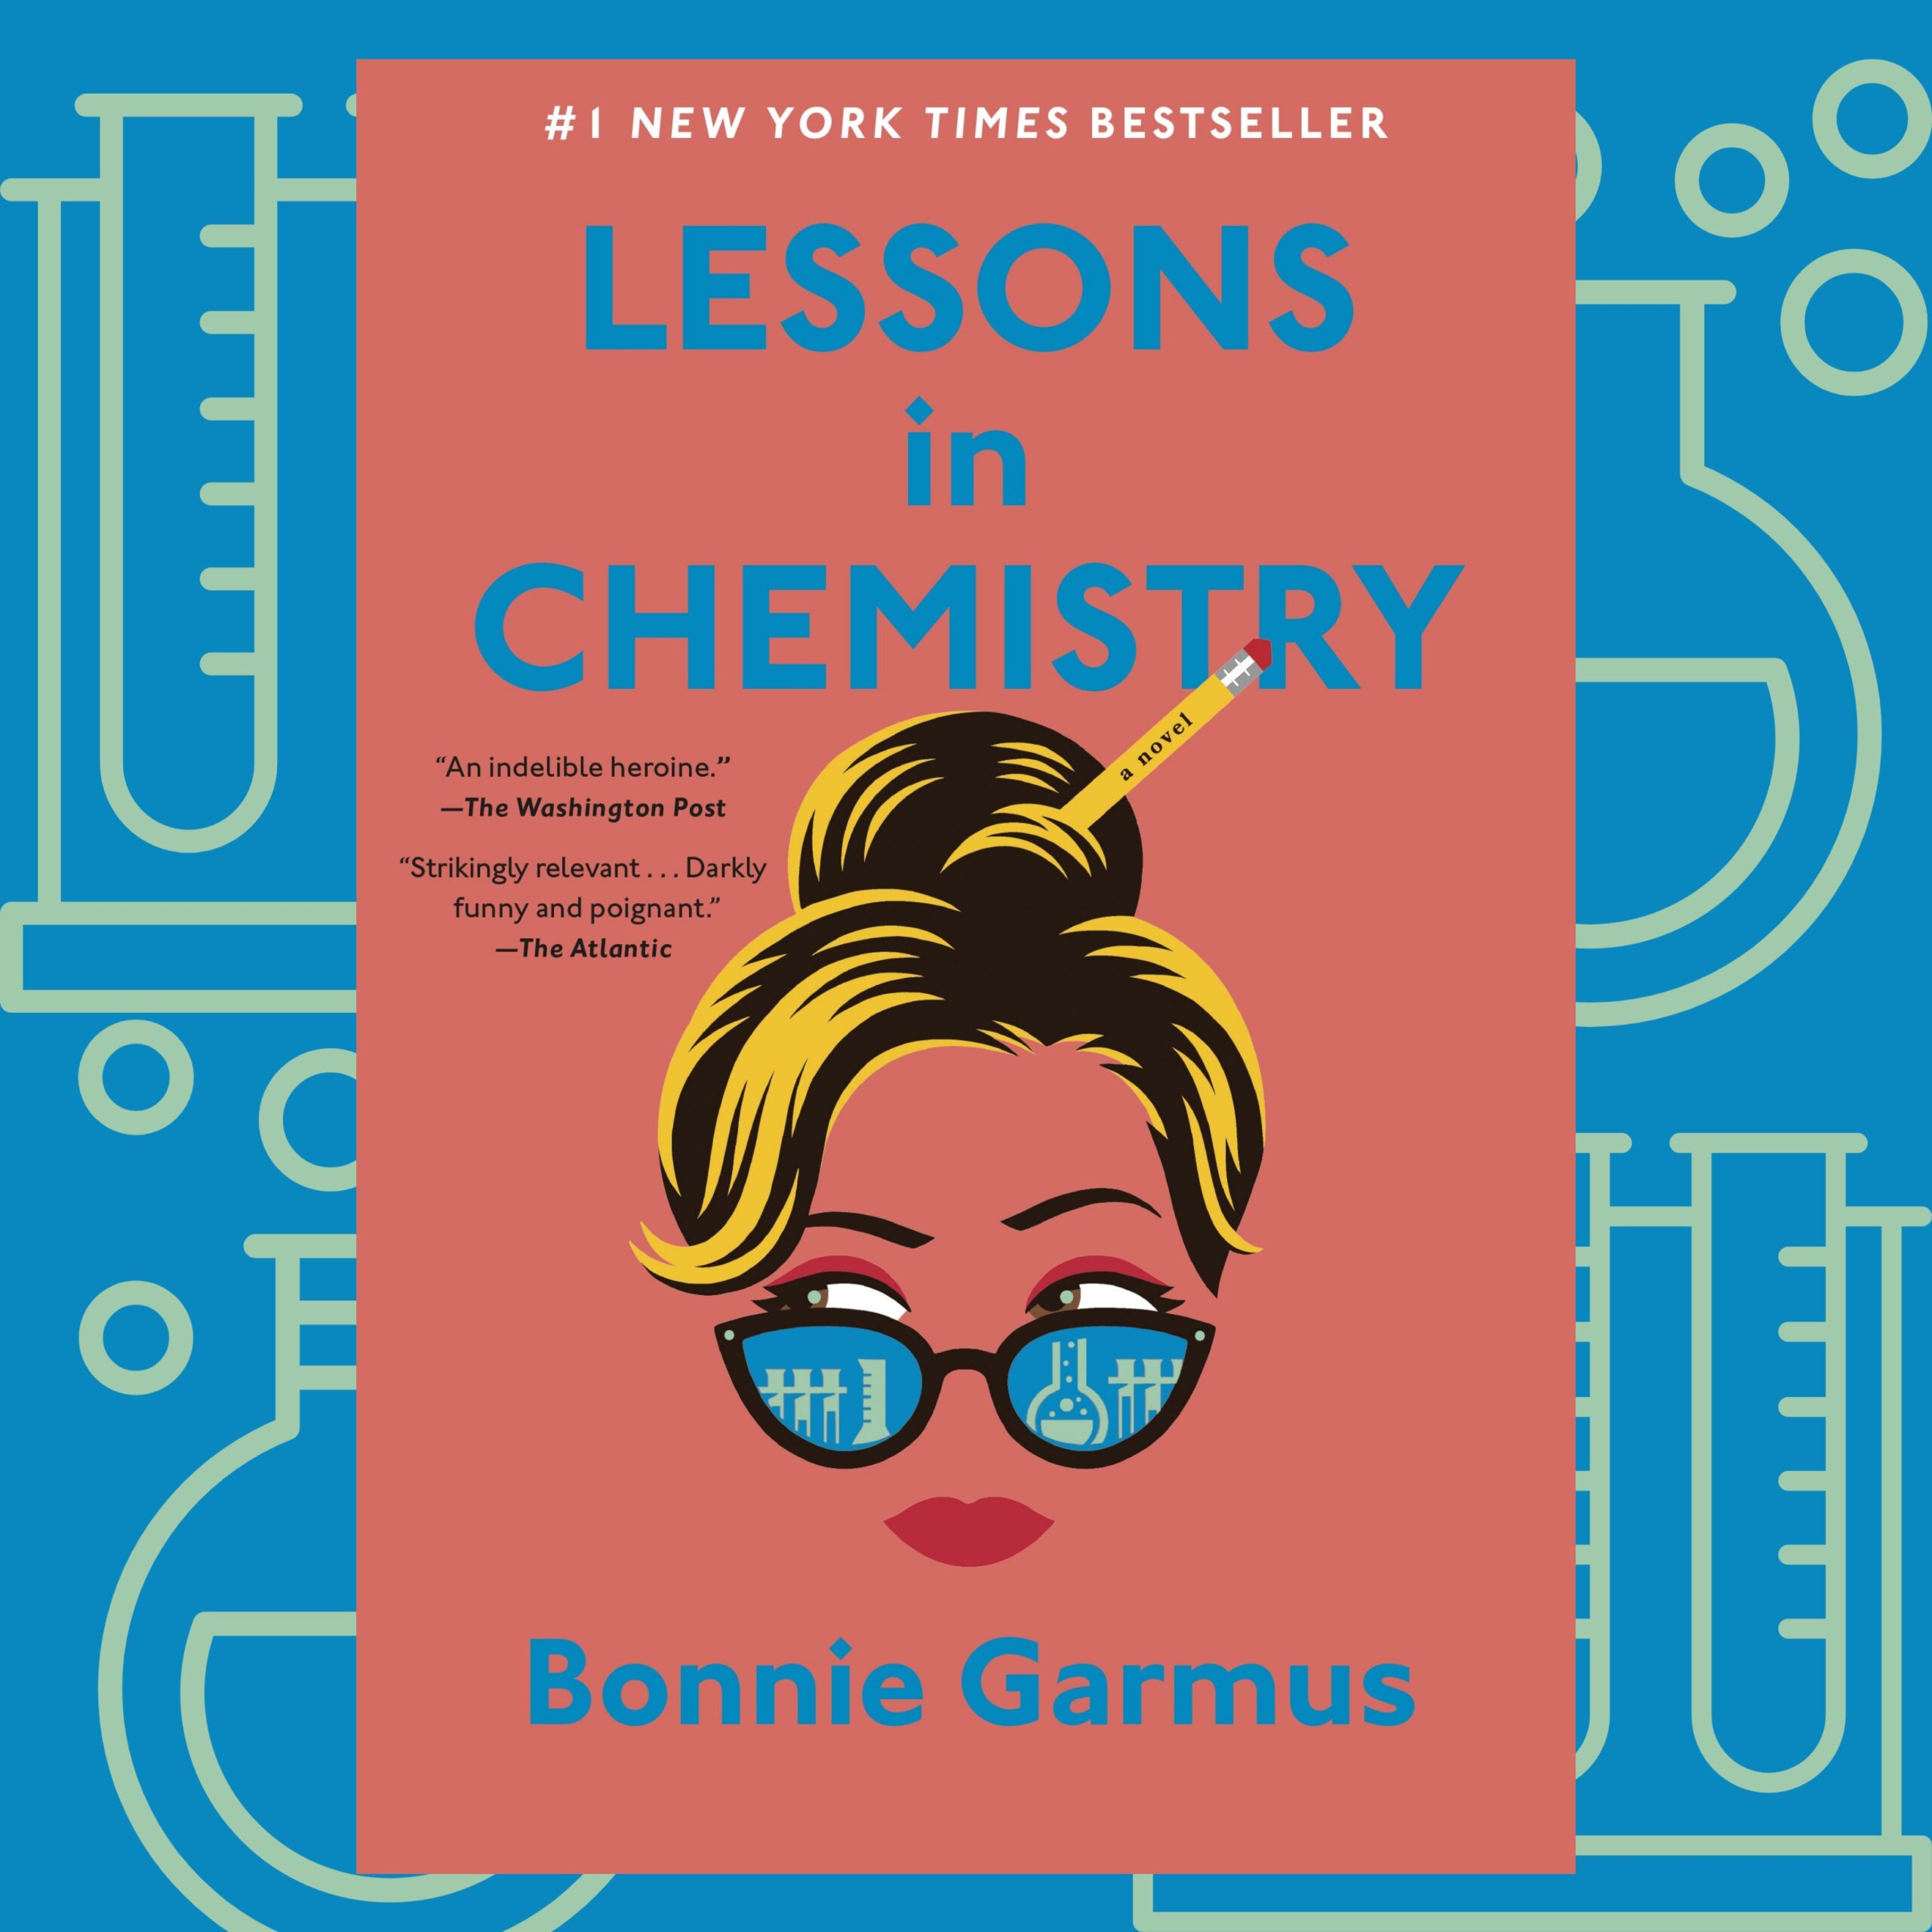 1816 – Bonnie Garmus - Lessons in Chemistry | The Book Show